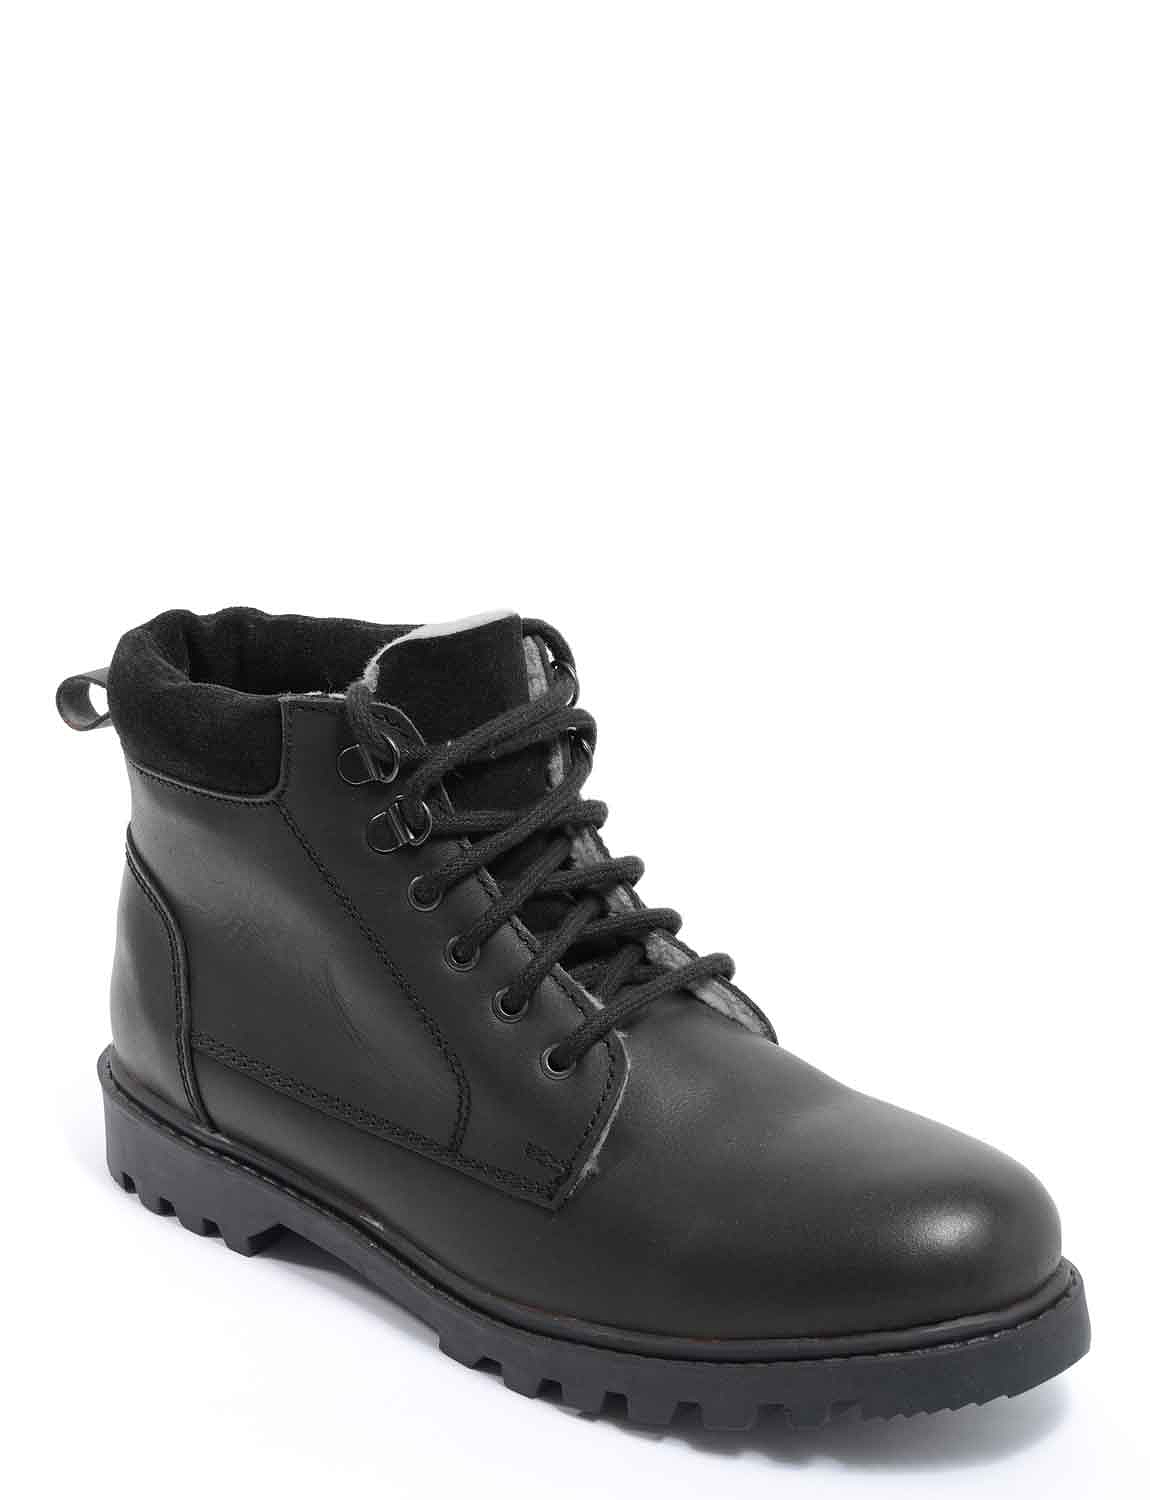 Pegasus Sherpa Fleece Lined Leather Boot | Chums